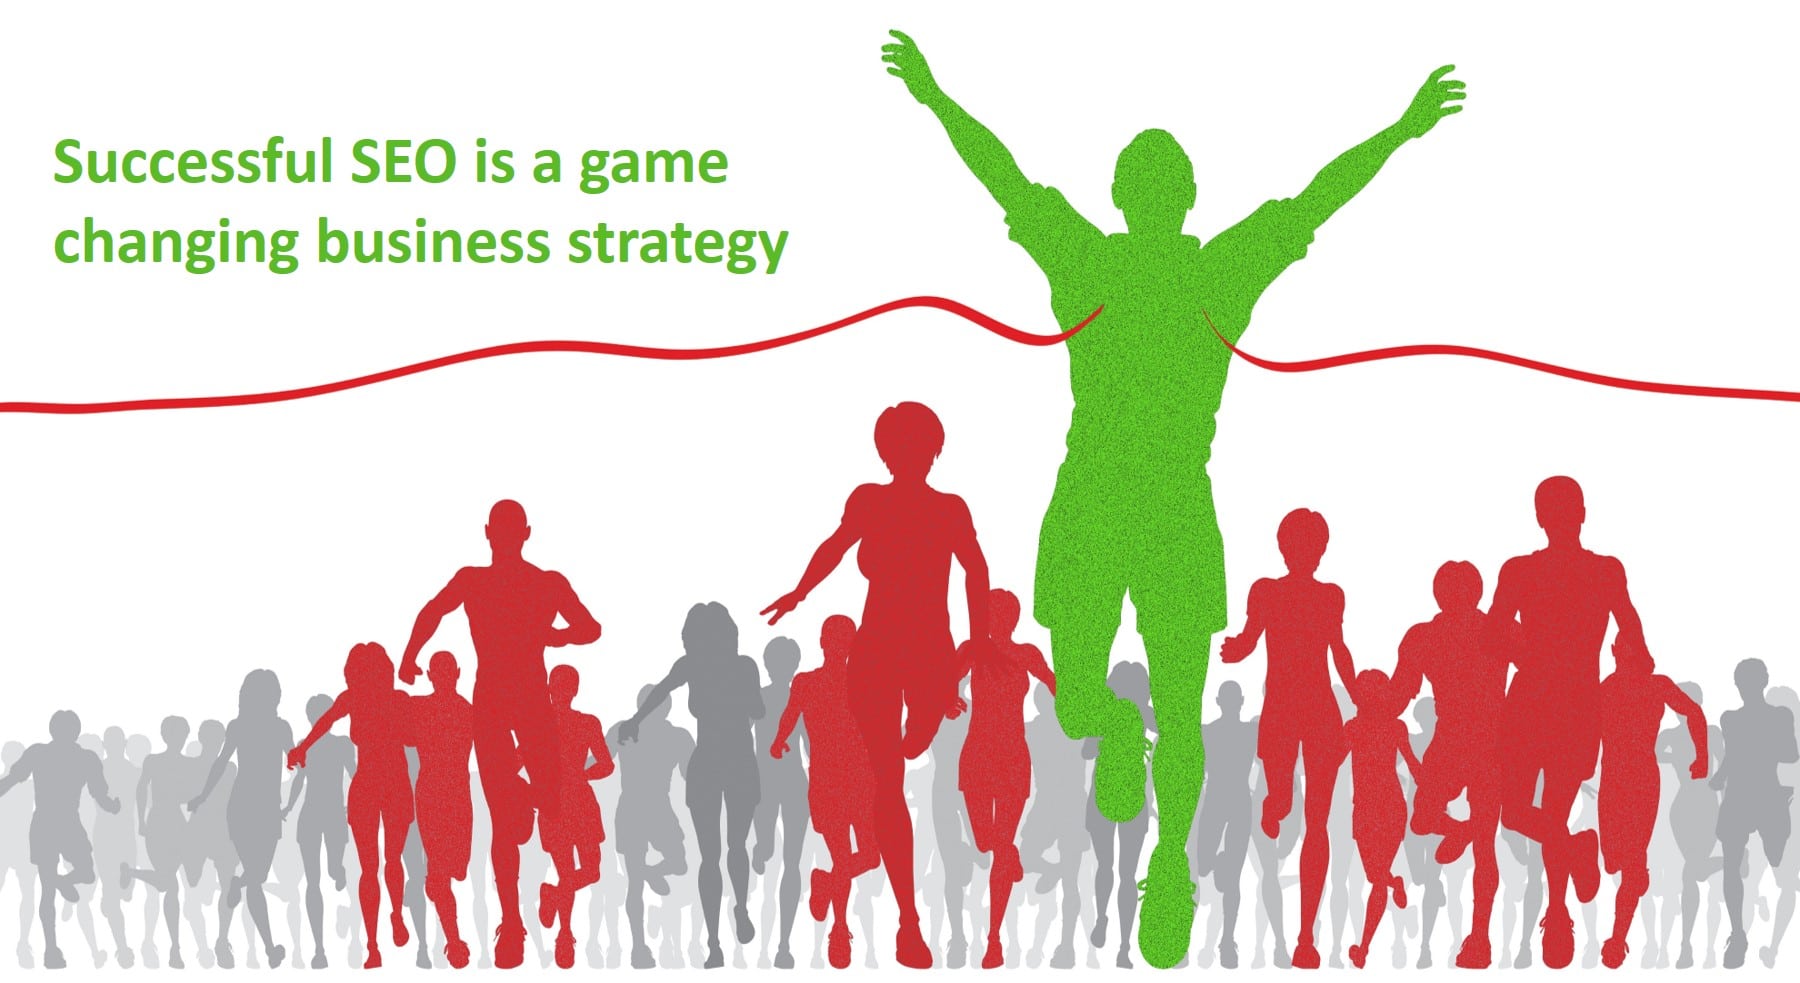 Successful SEO (Search Engine Optimization) is a game changing business strategy.